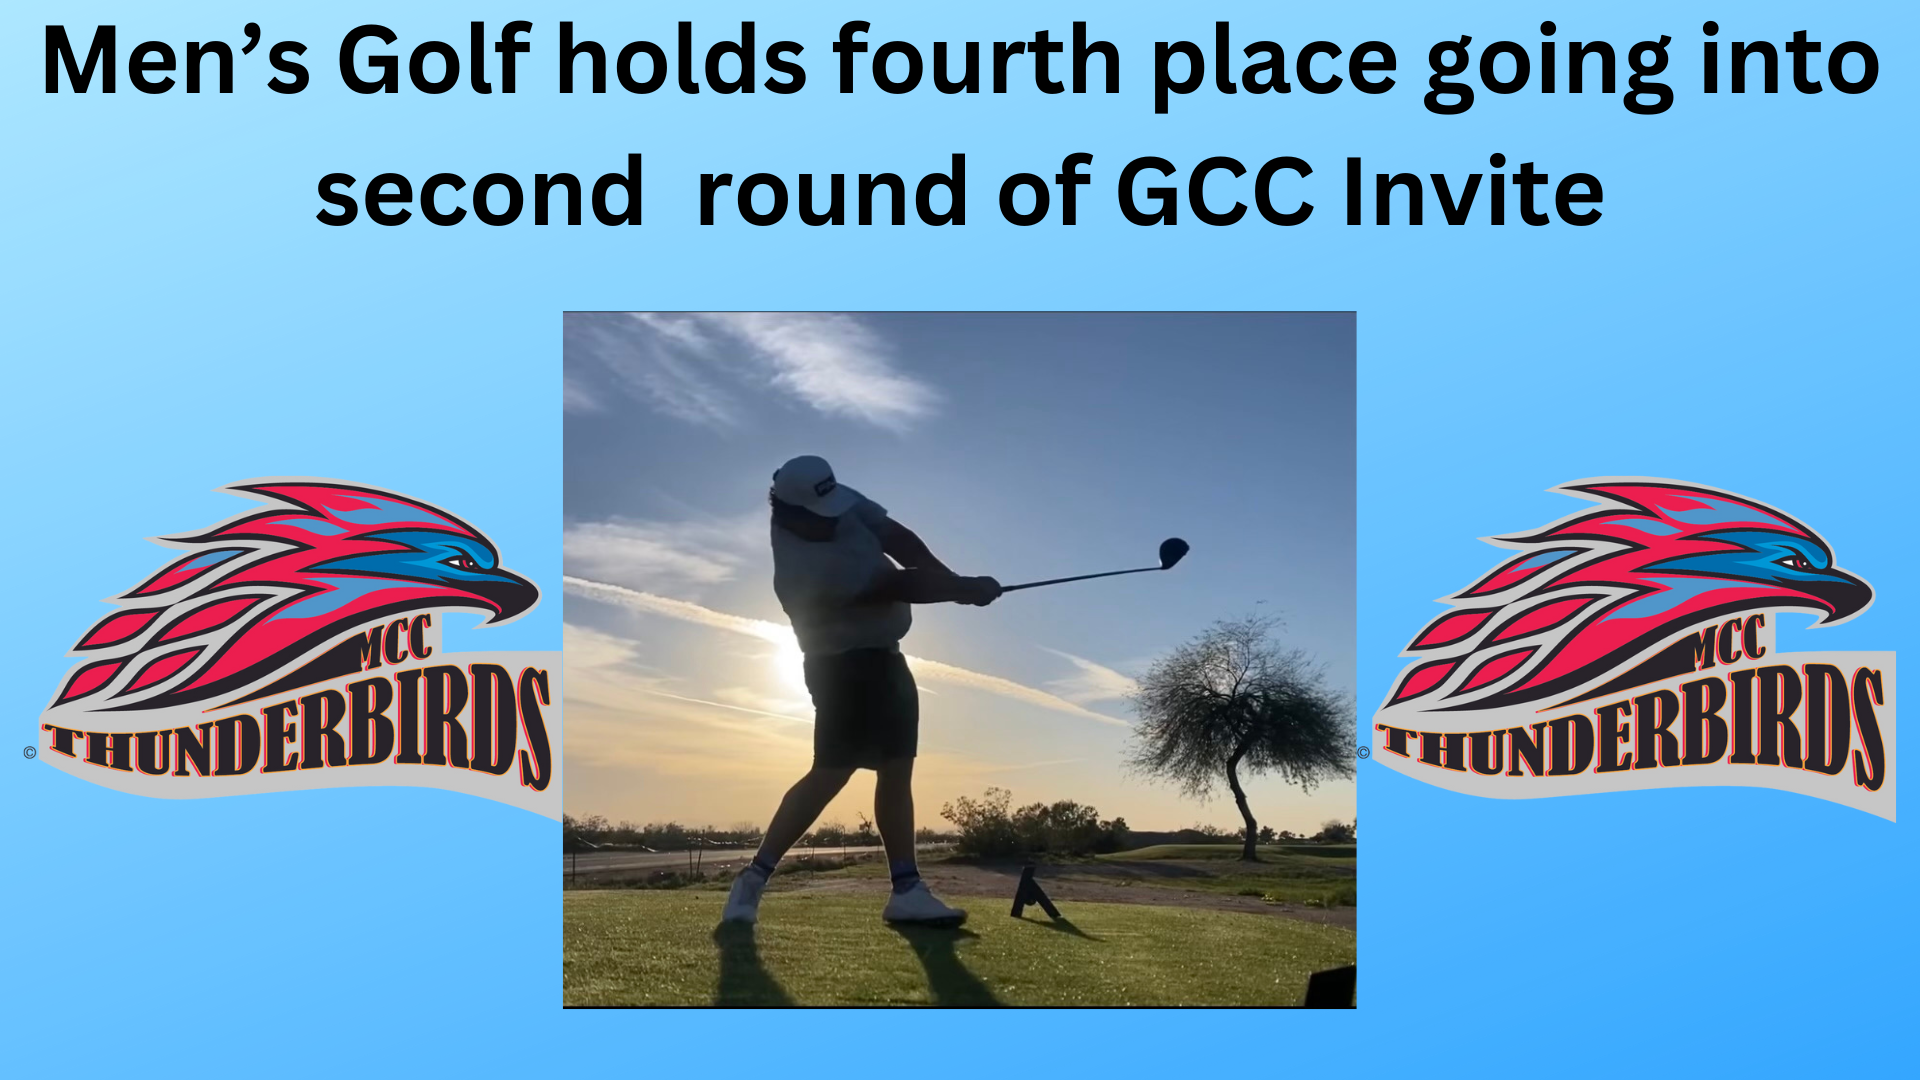 T-Birds in 4th after first round of GCC Invite